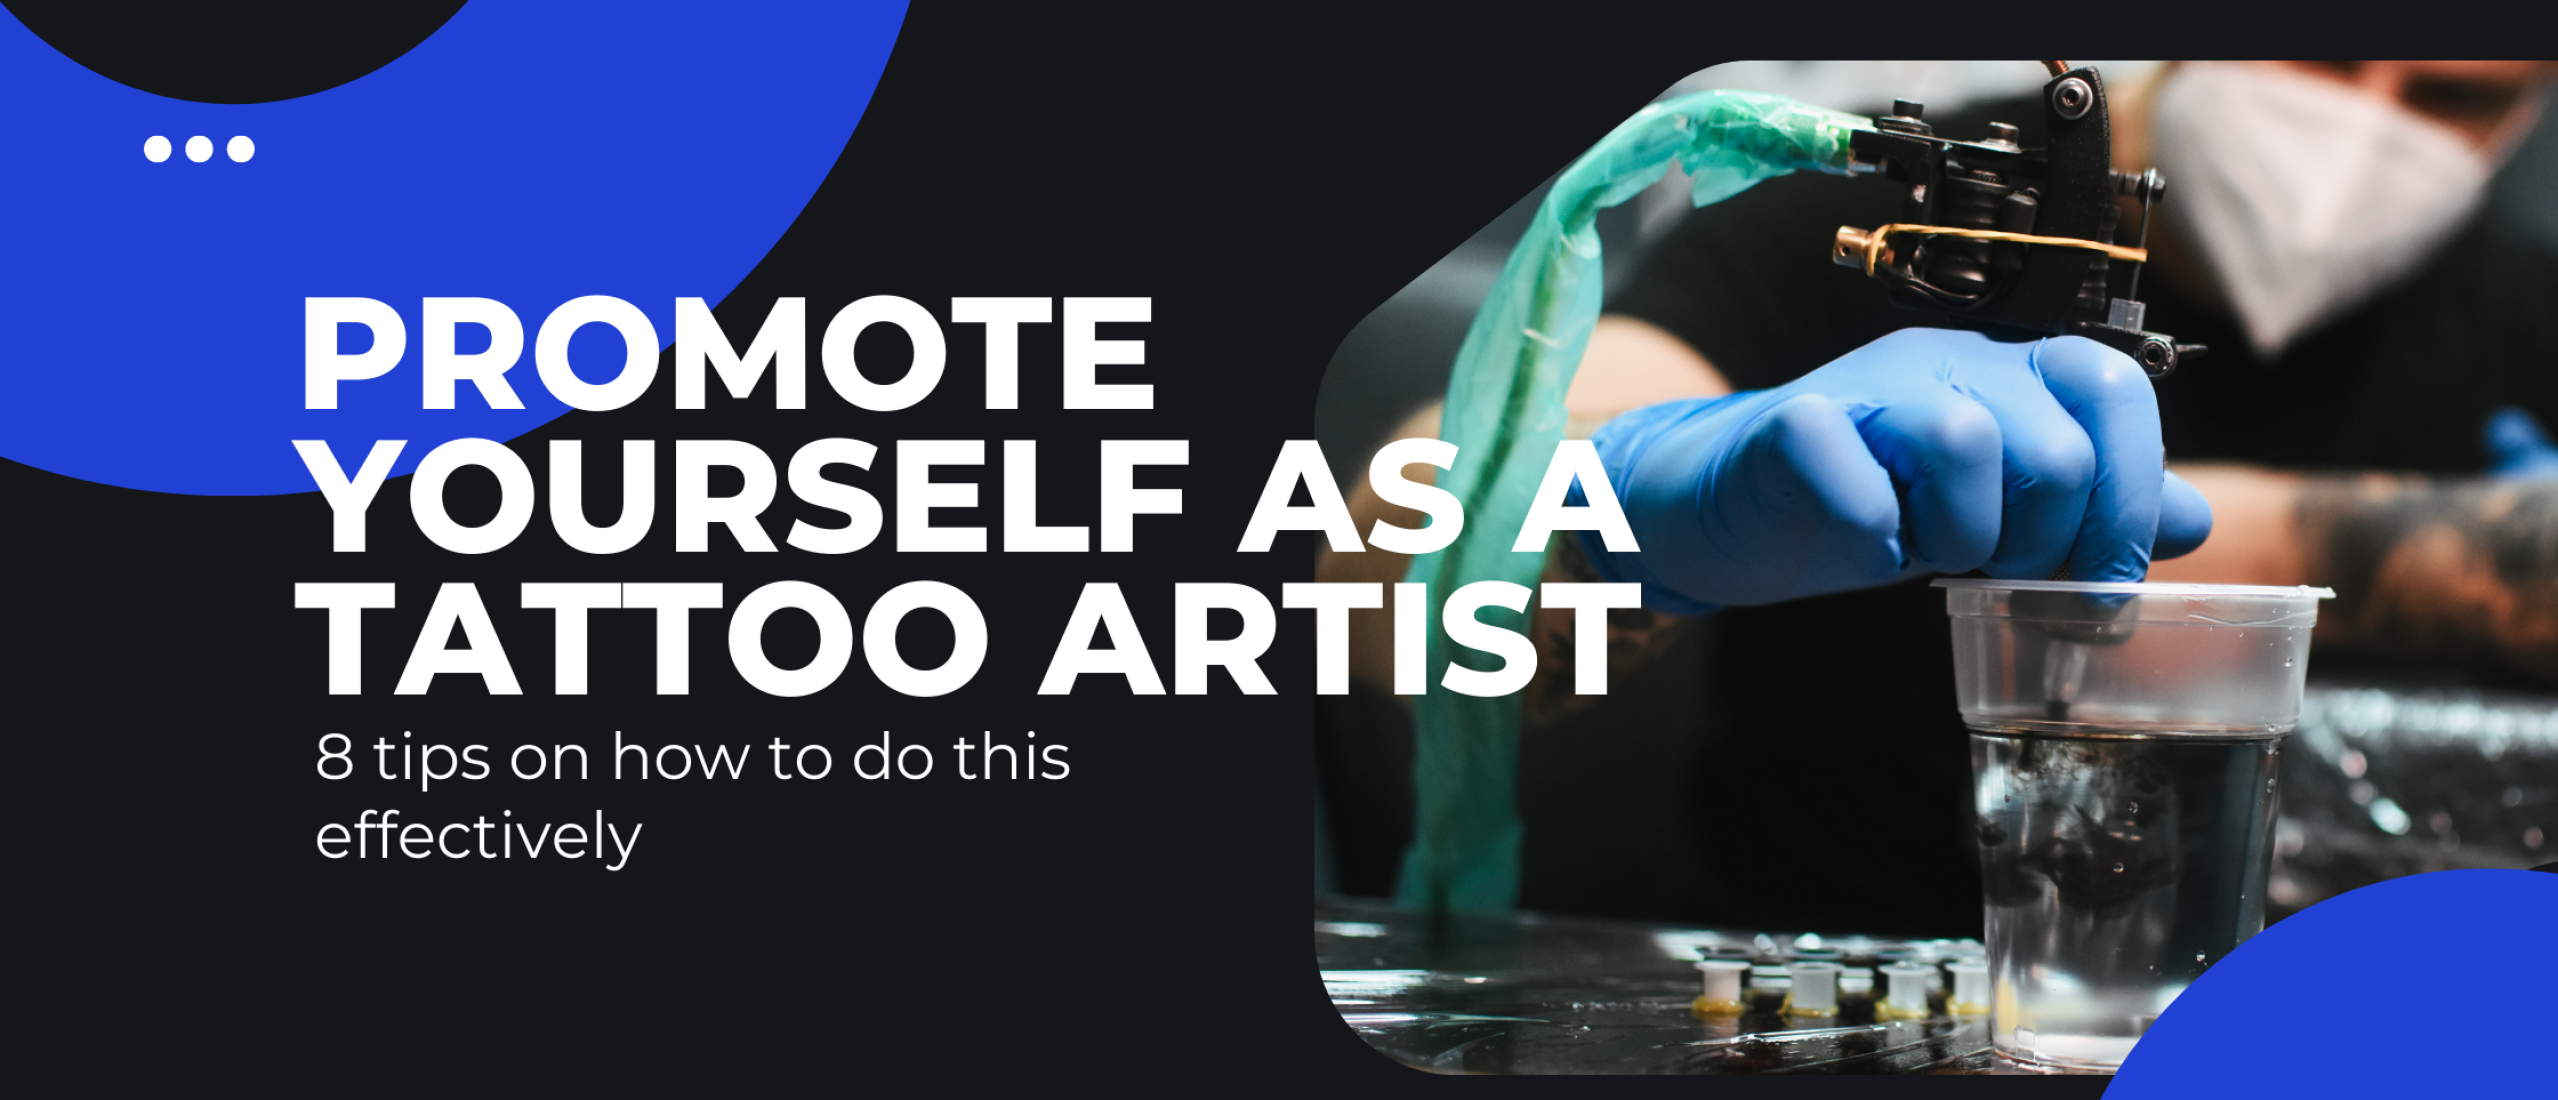 8 tips on how to promote yourself as a tatttoo artist